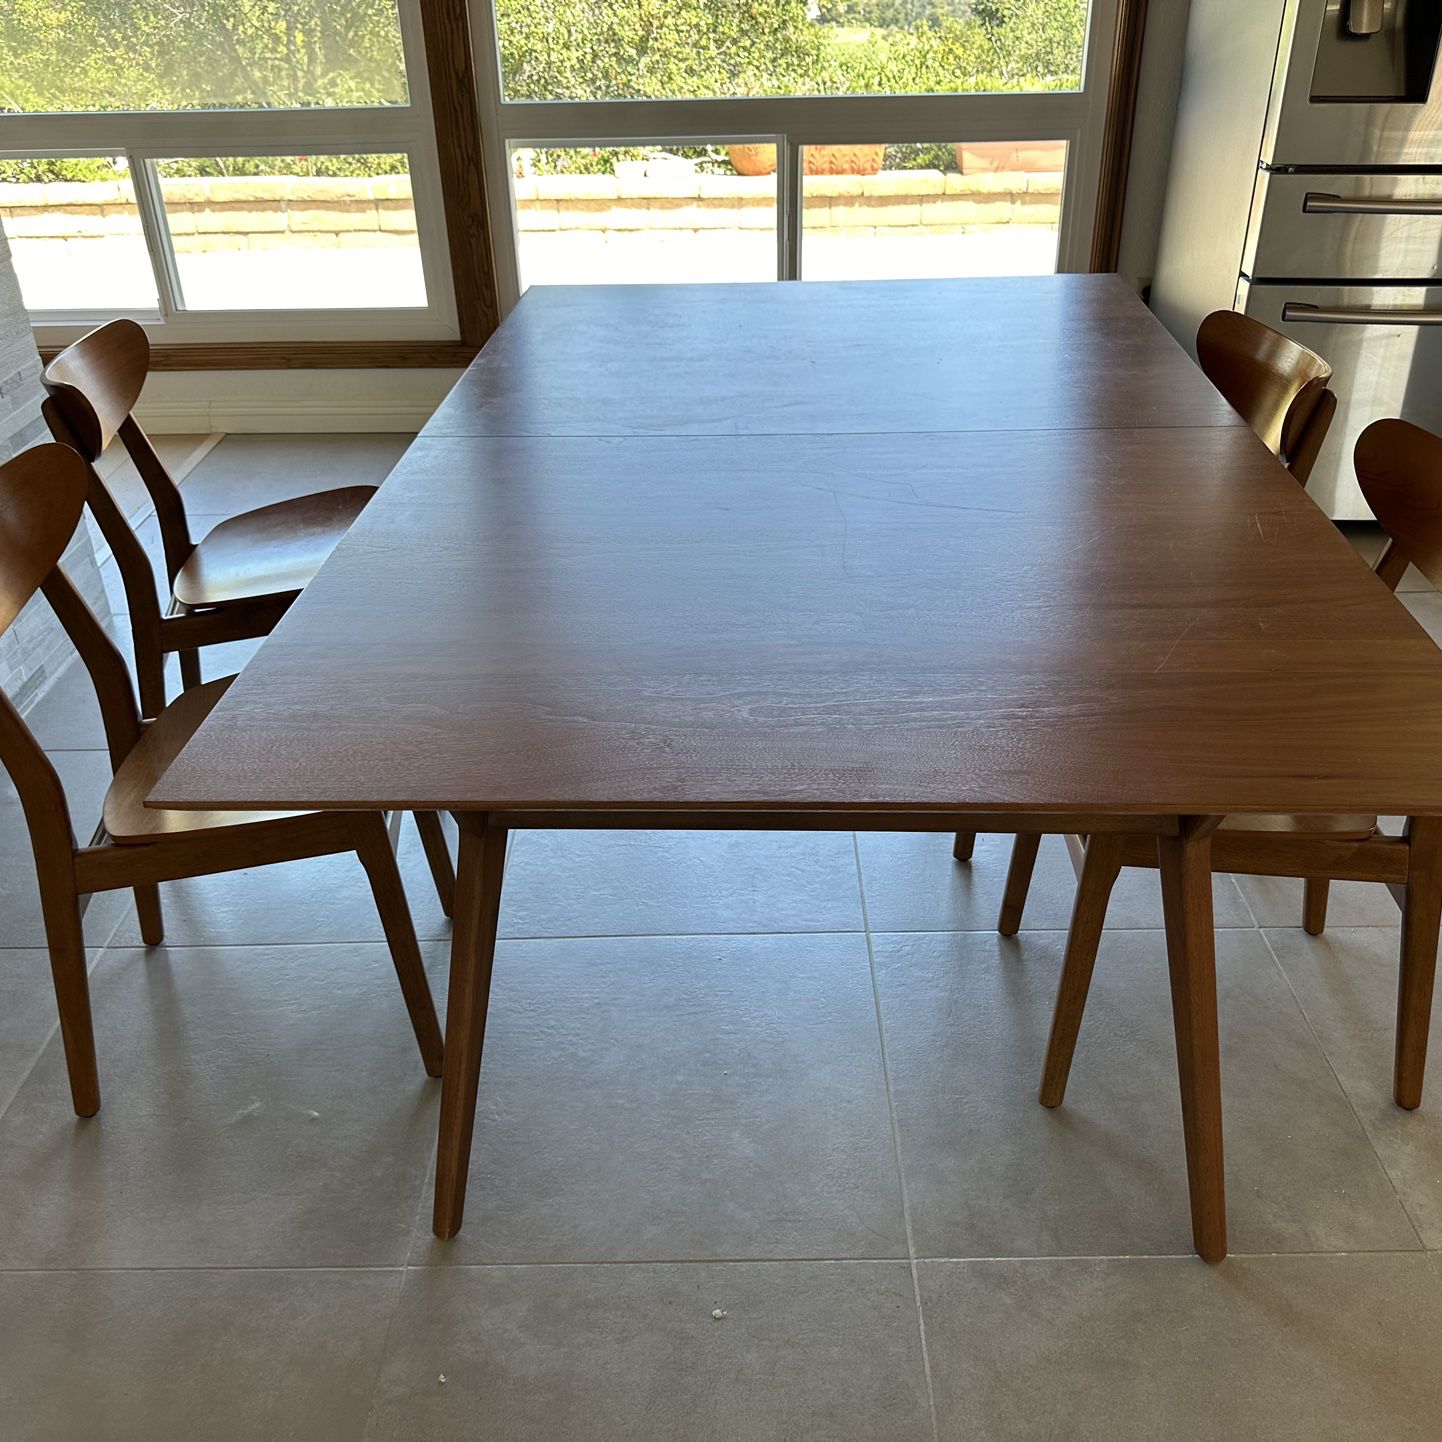 Gorgeous Gently Used West Elm Dining Set